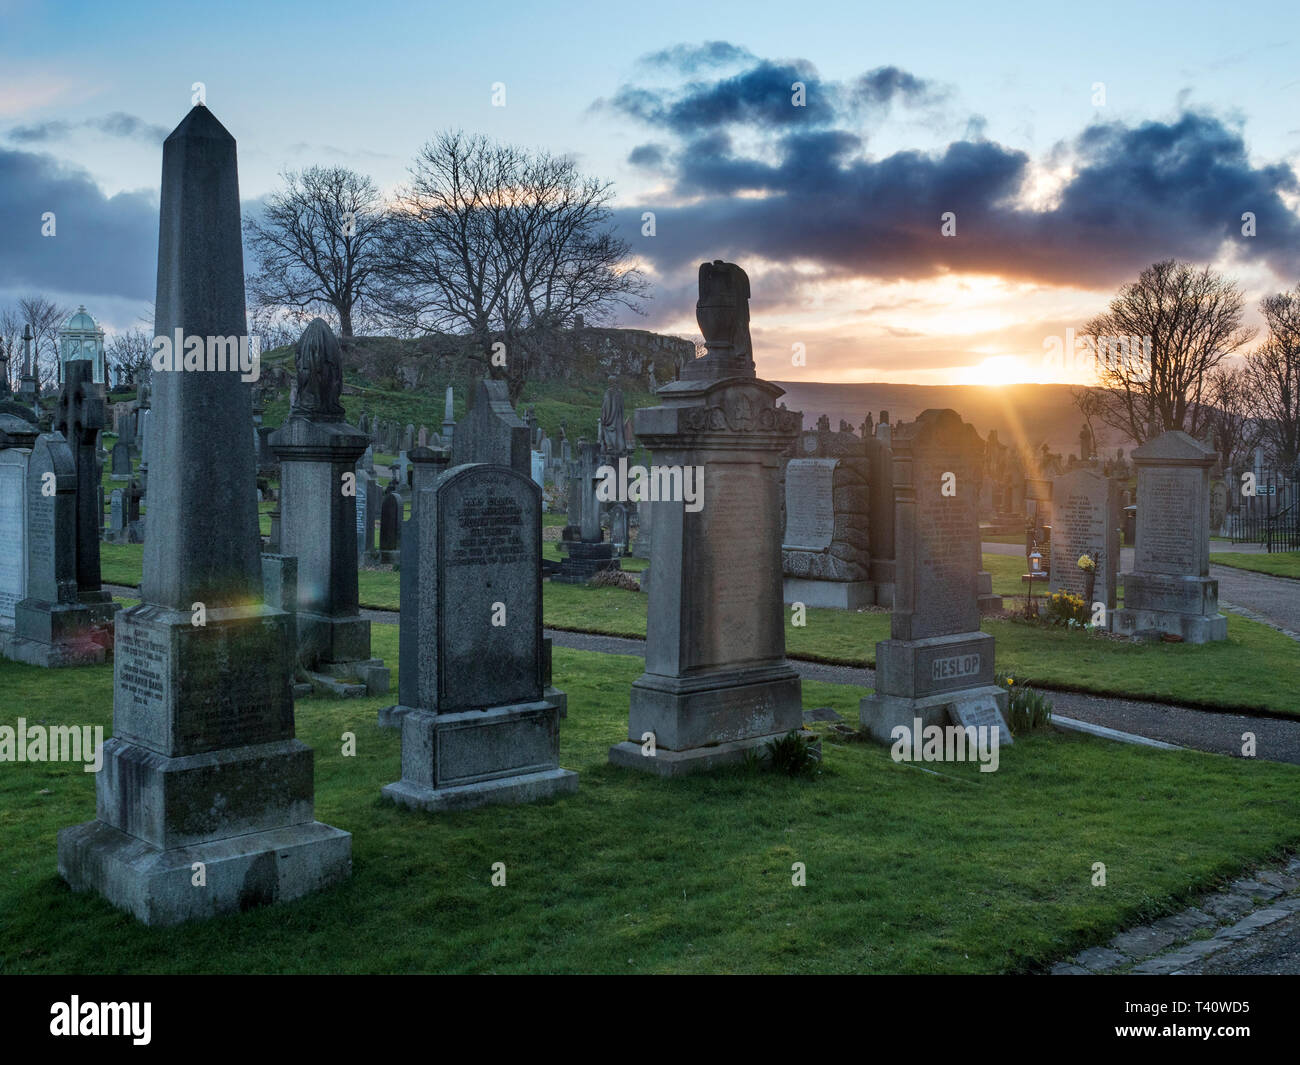 Gravestones in the Old Town Cemetery at sunset City of Stirling Scotland Stock Photo